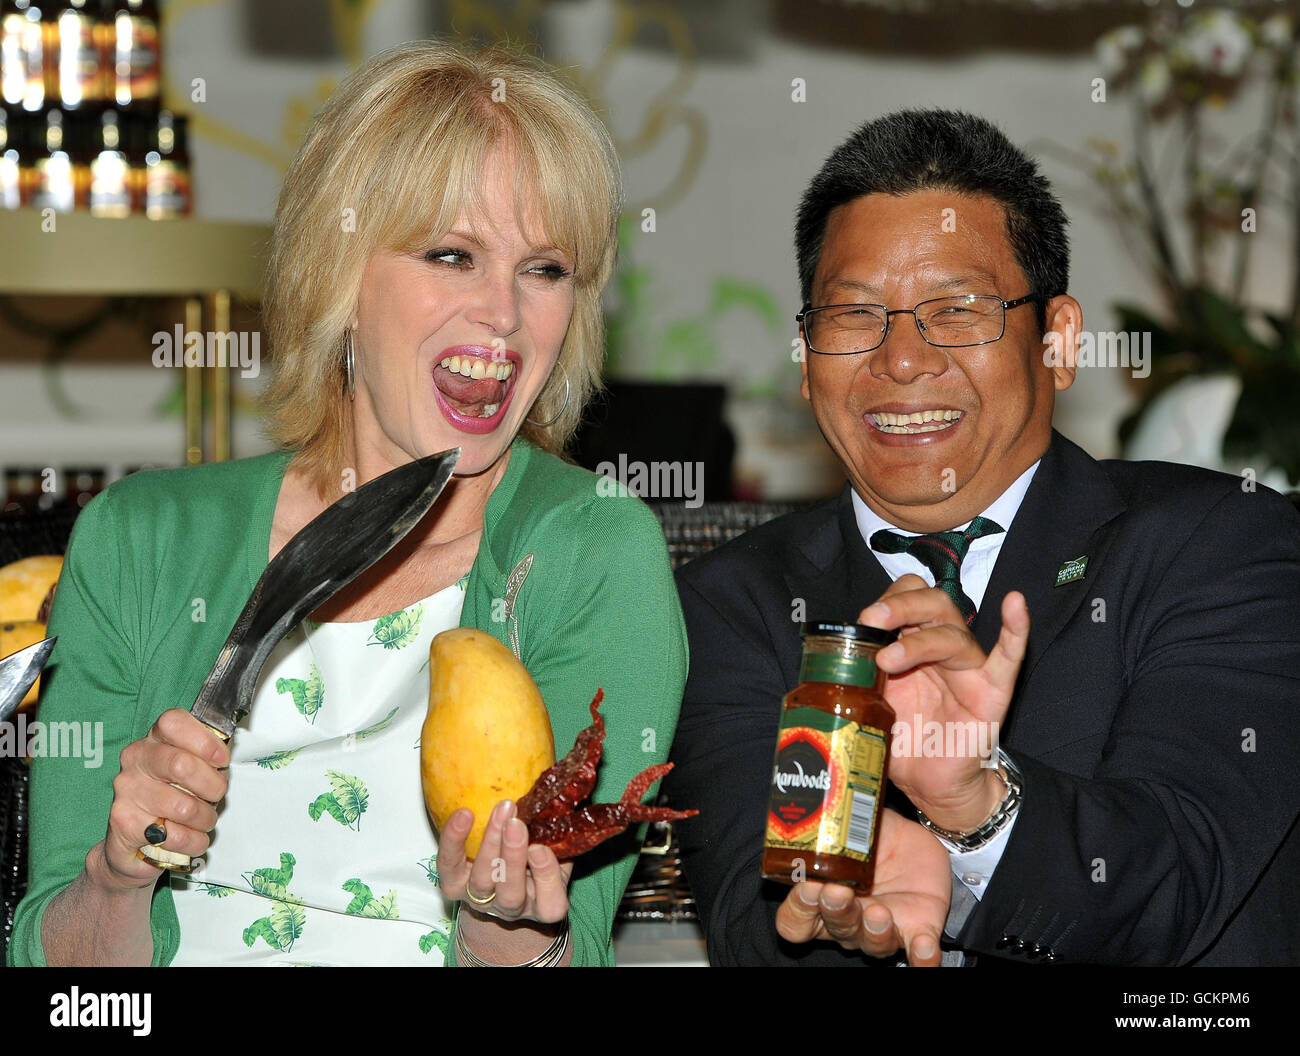 Joanna Lumley with Hum Bahadur Gurung and a jar of the new Sharwood's Mango and Kashmiri chutney that she is launching at the Harvey Nicholls store in central London. Stock Photo